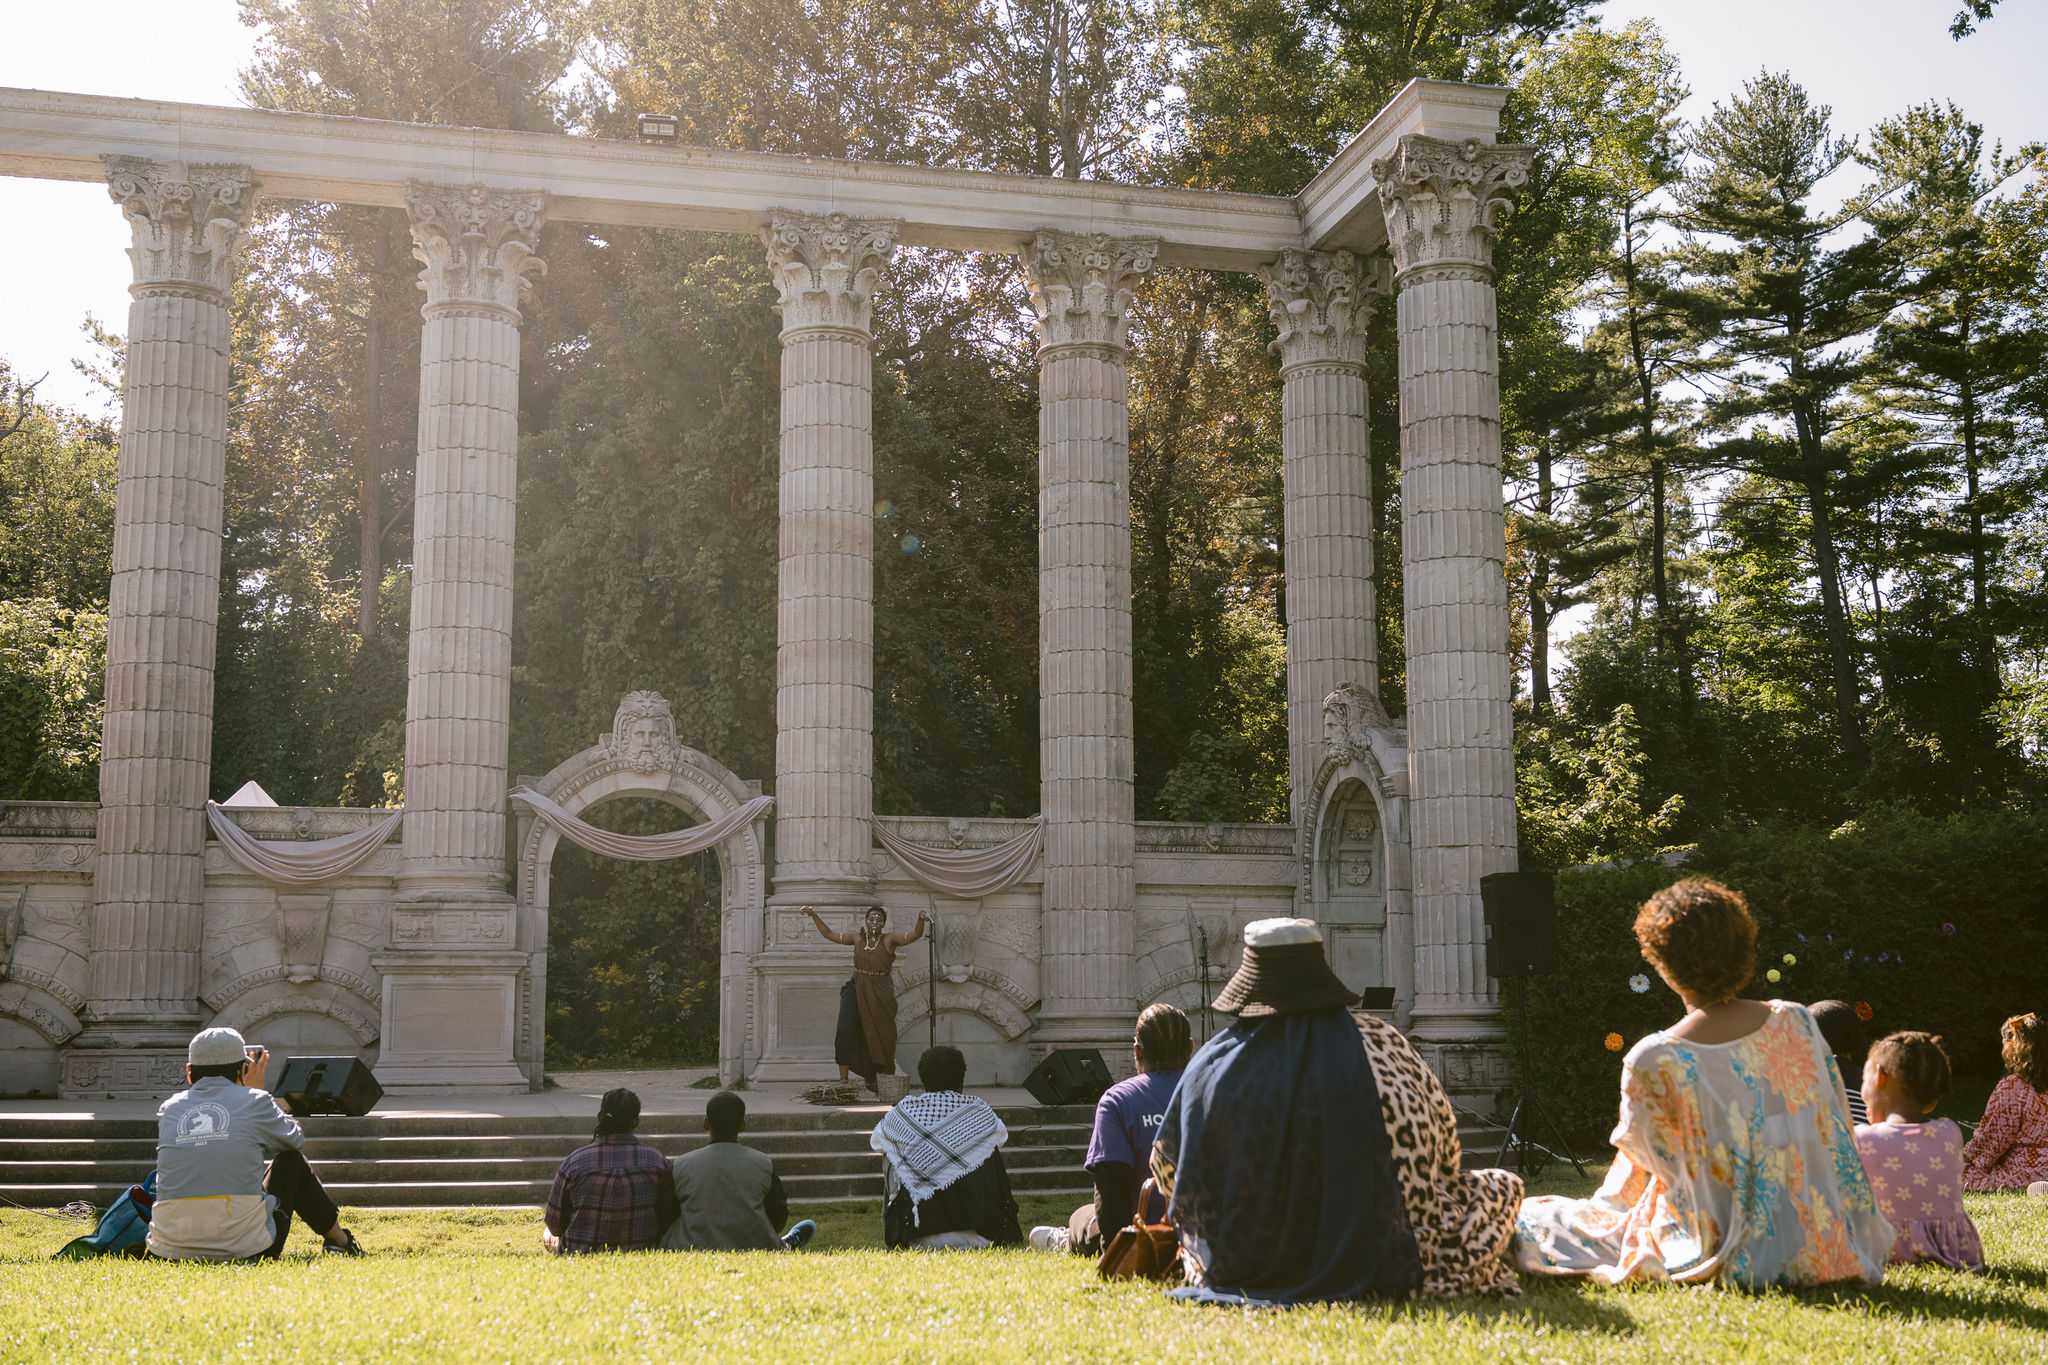 An audience sits in the grass to watch the performance on the outdoor stage surrounded by Greek-style columns